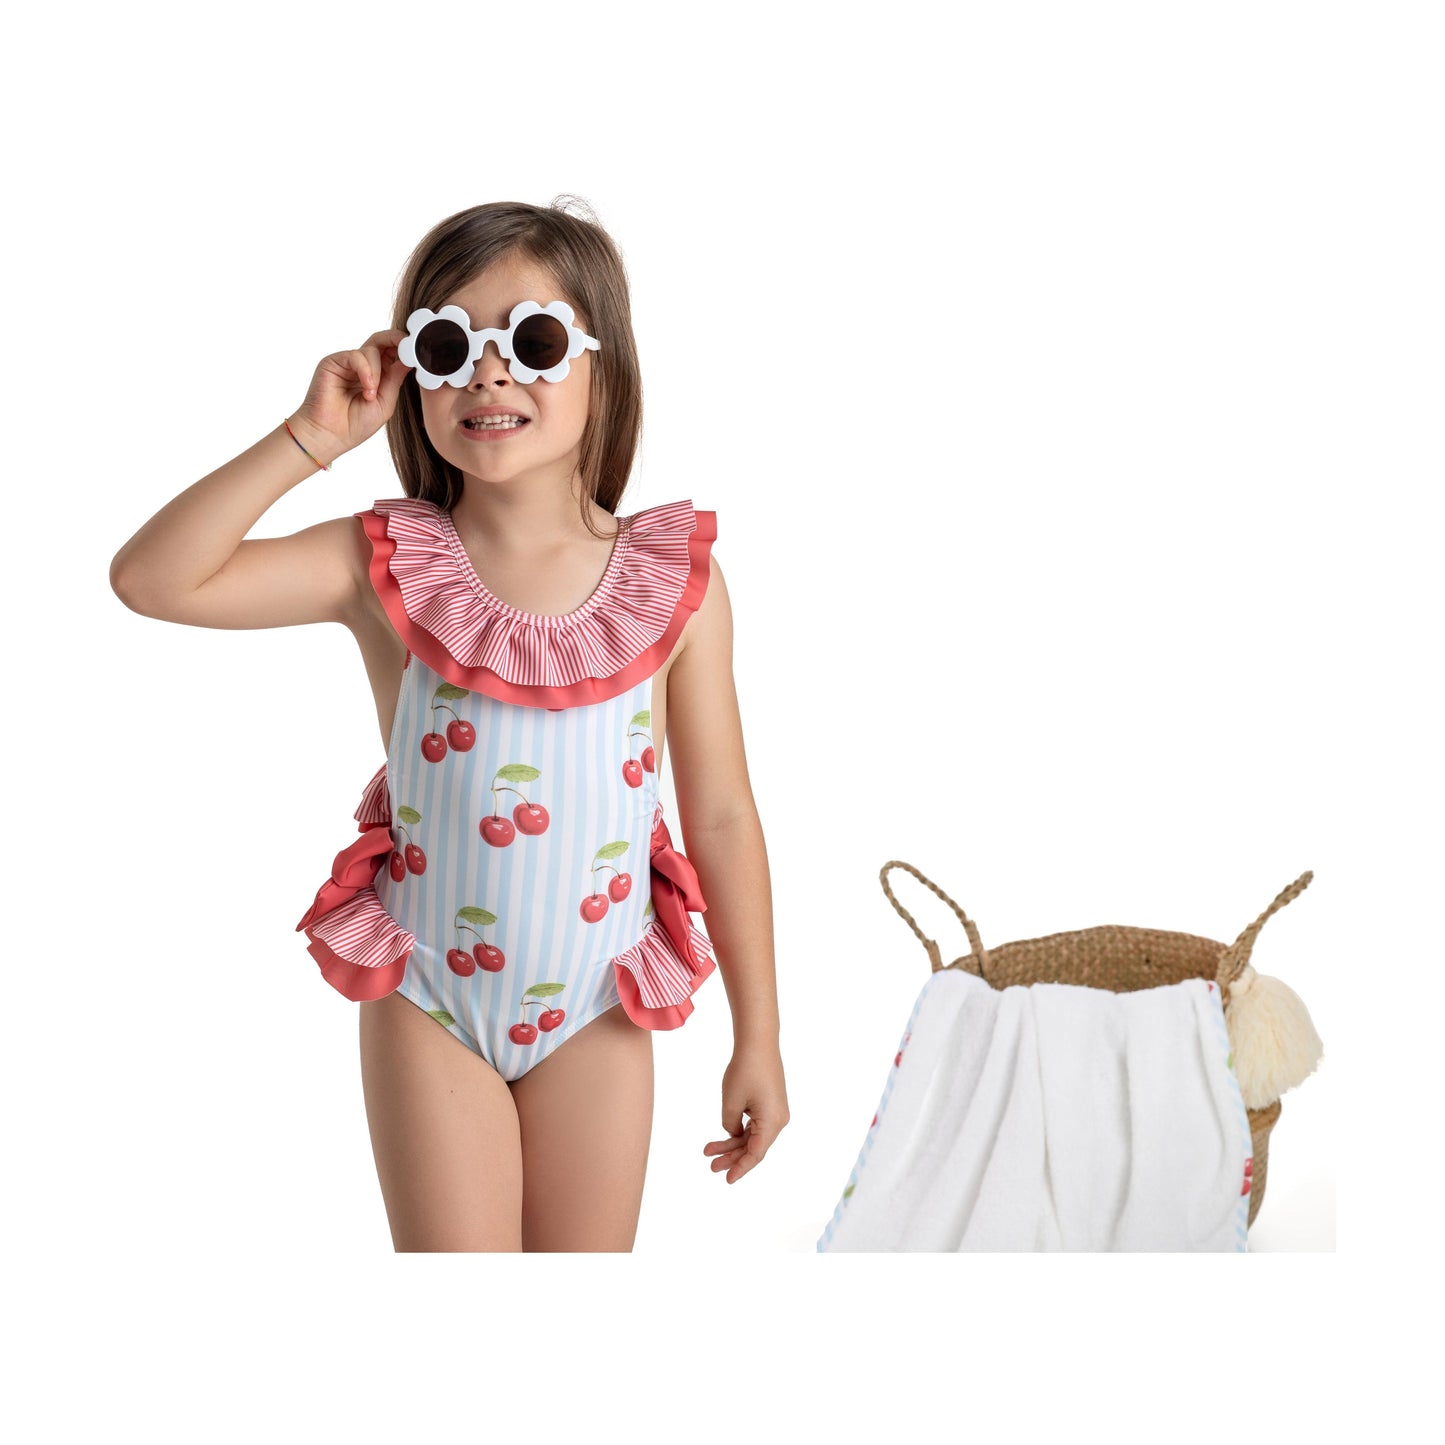 Load image into Gallery viewer, Cherries swim costume for girls by Meia Pata - Adora
